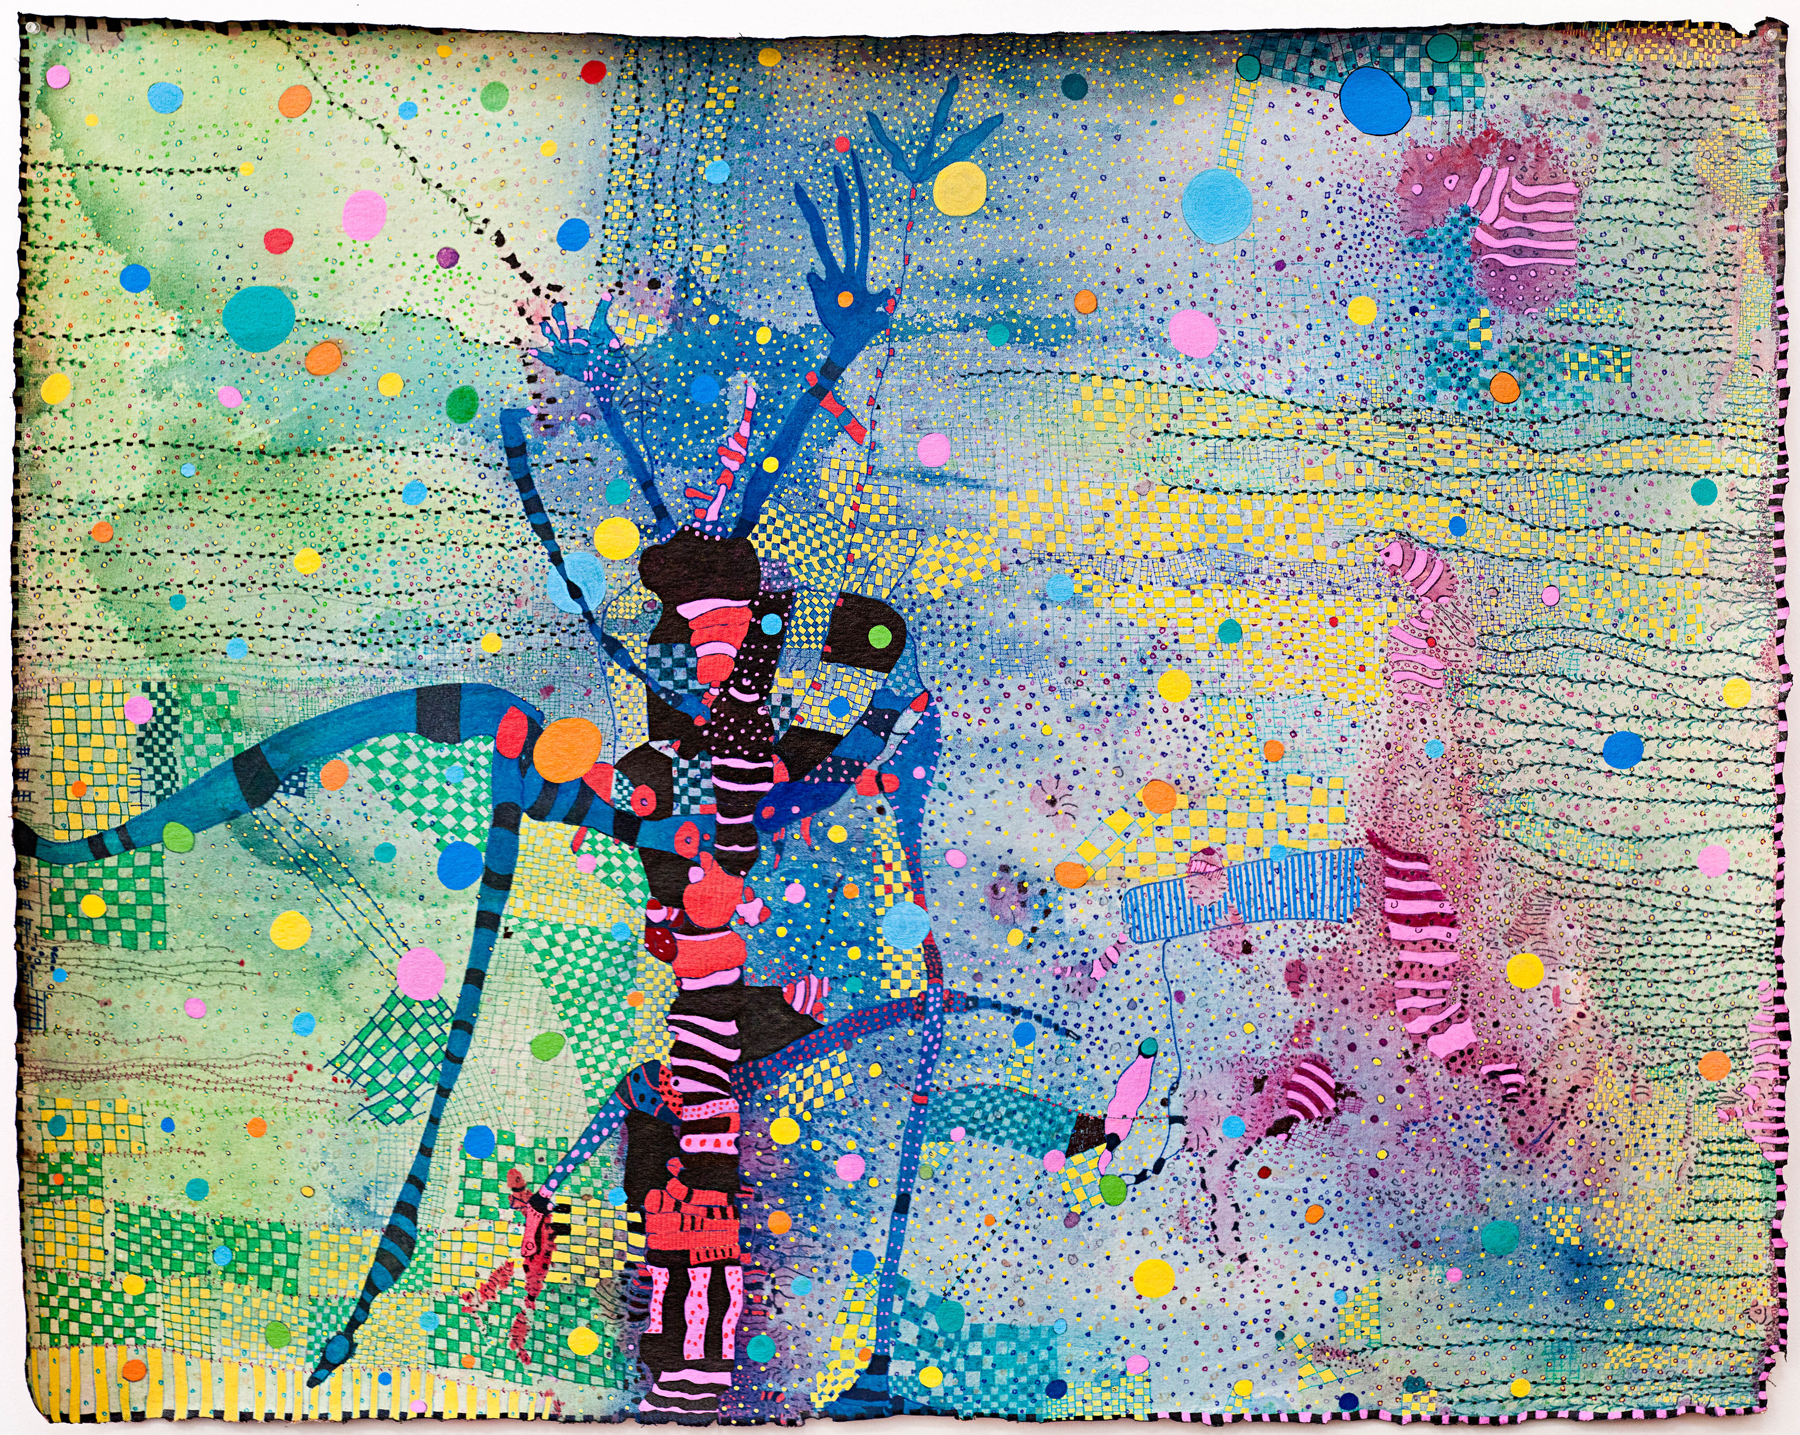 2011-055_Rossinante Under Cover_41x52%22_mixed media on canvas.jpg